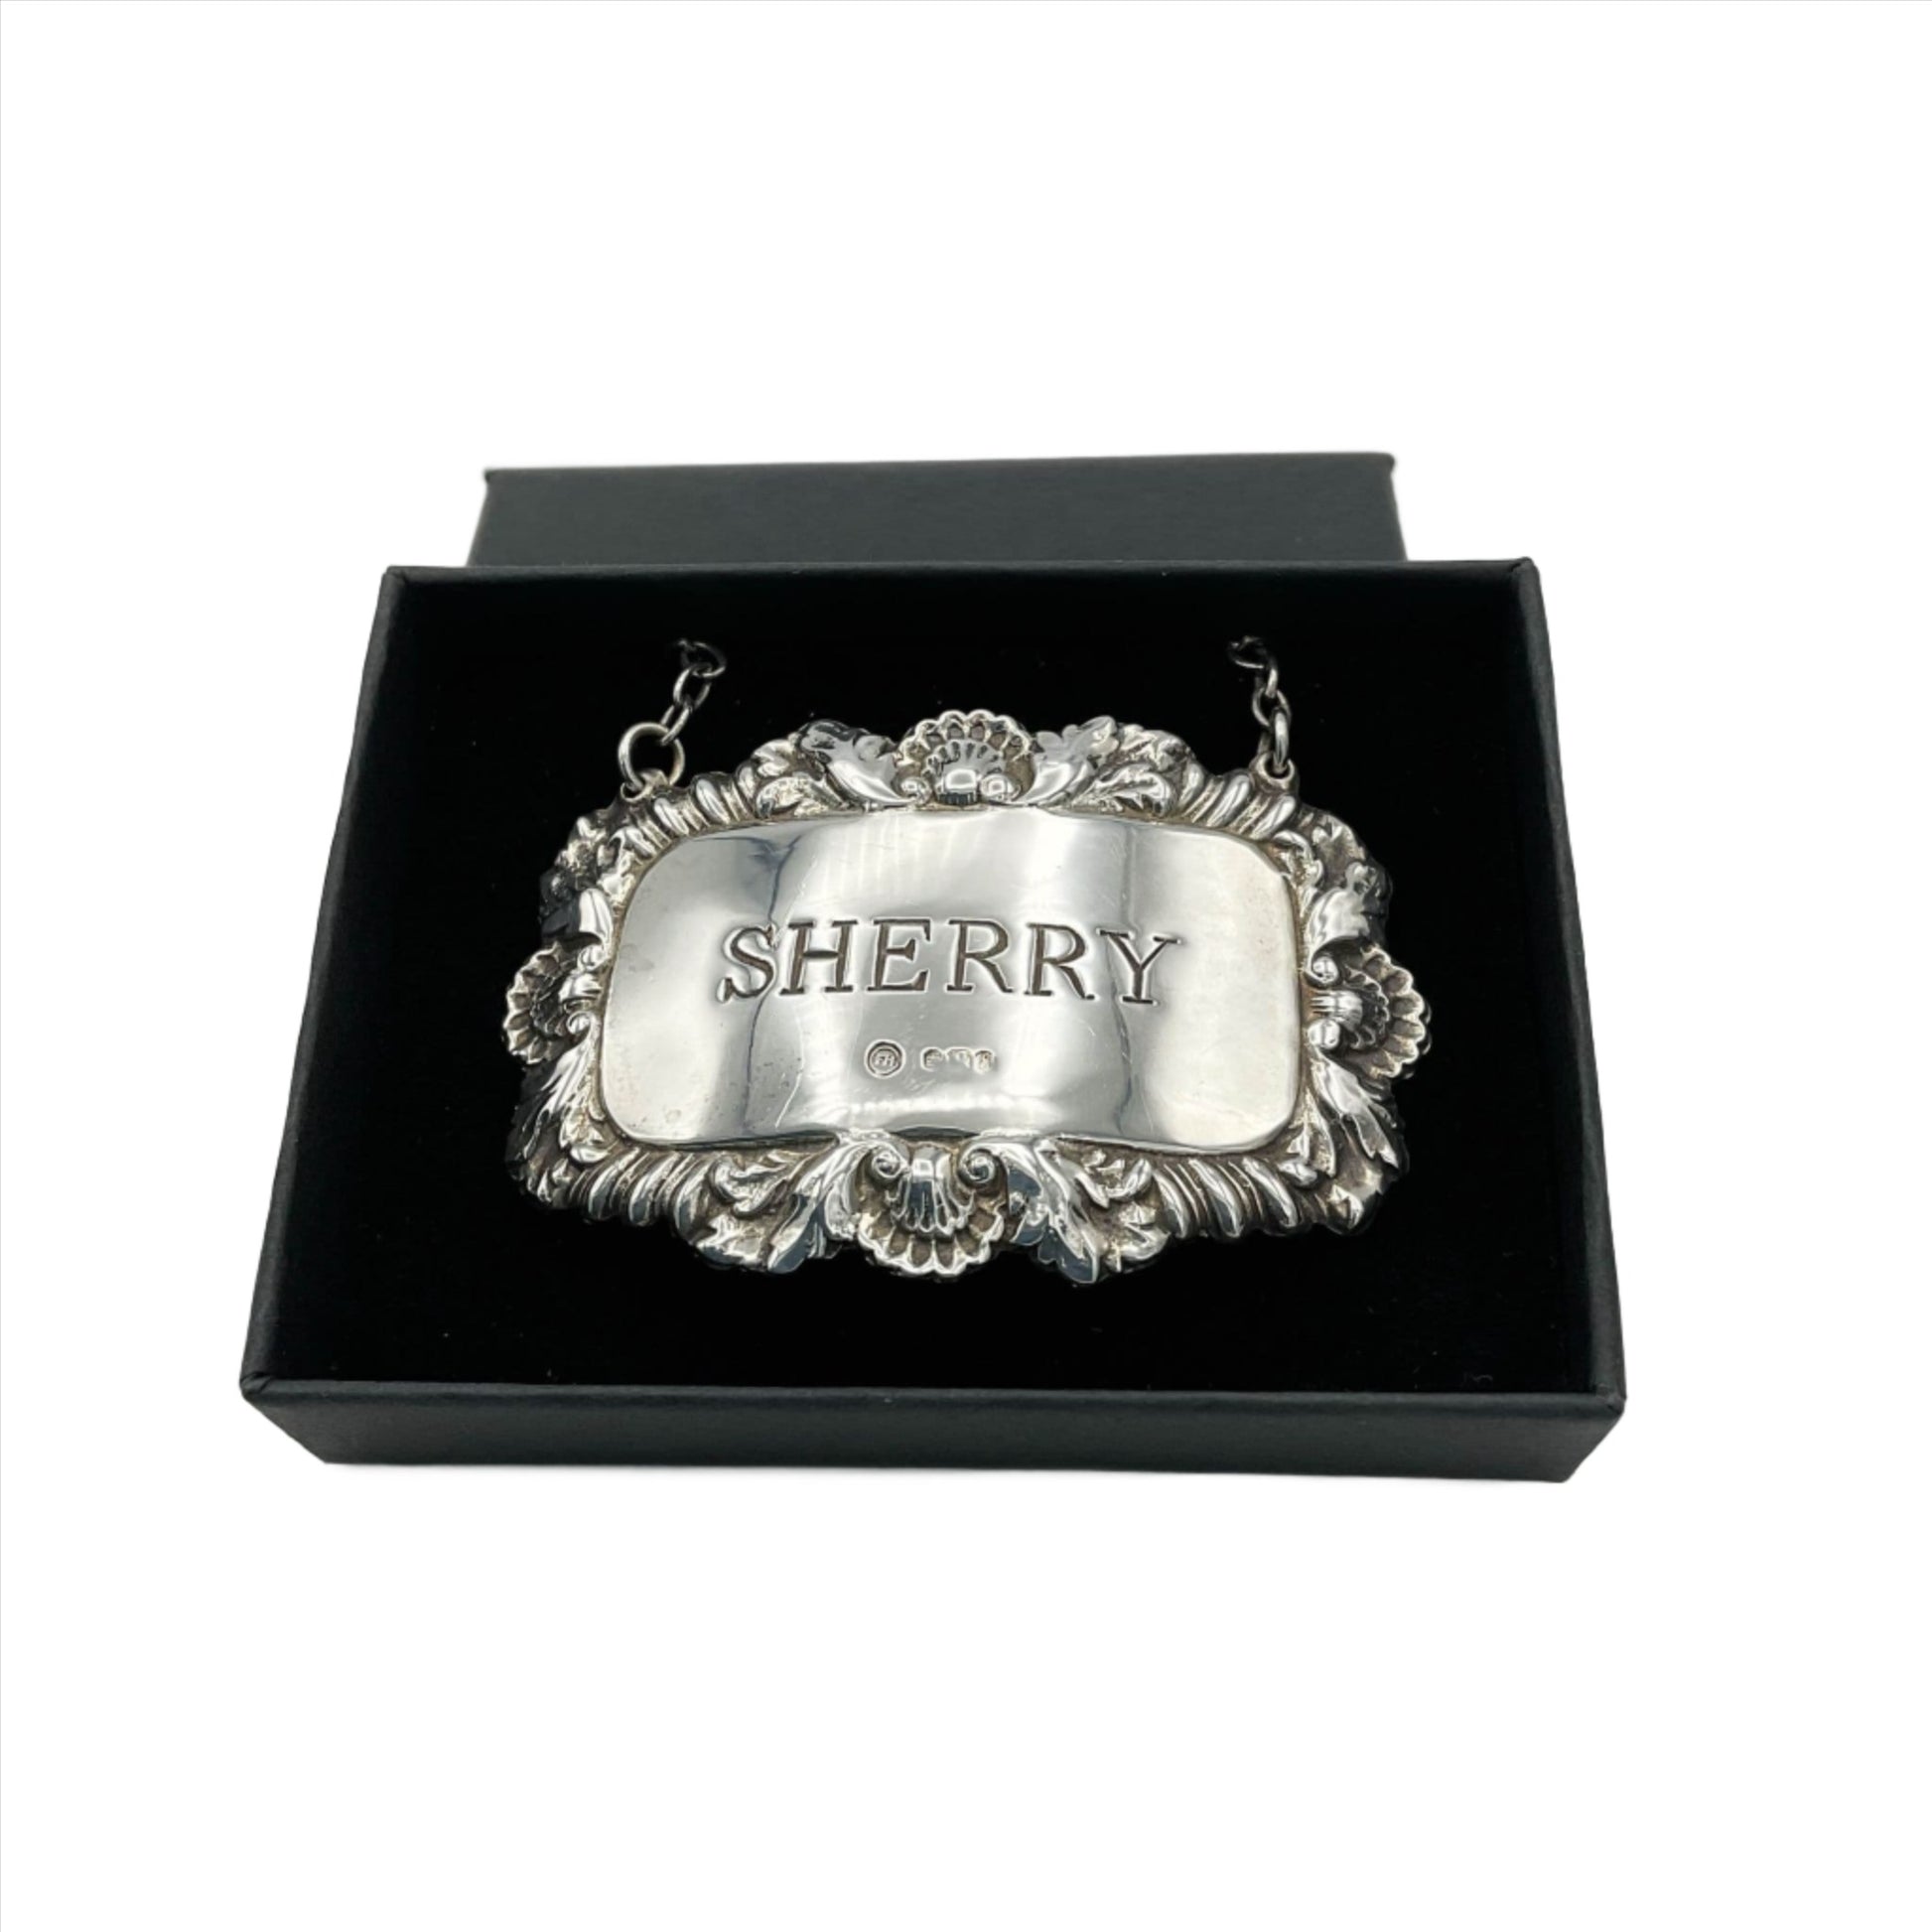 Ornate silver decanter label with Sherry engraved in the centre. The label is in a black box